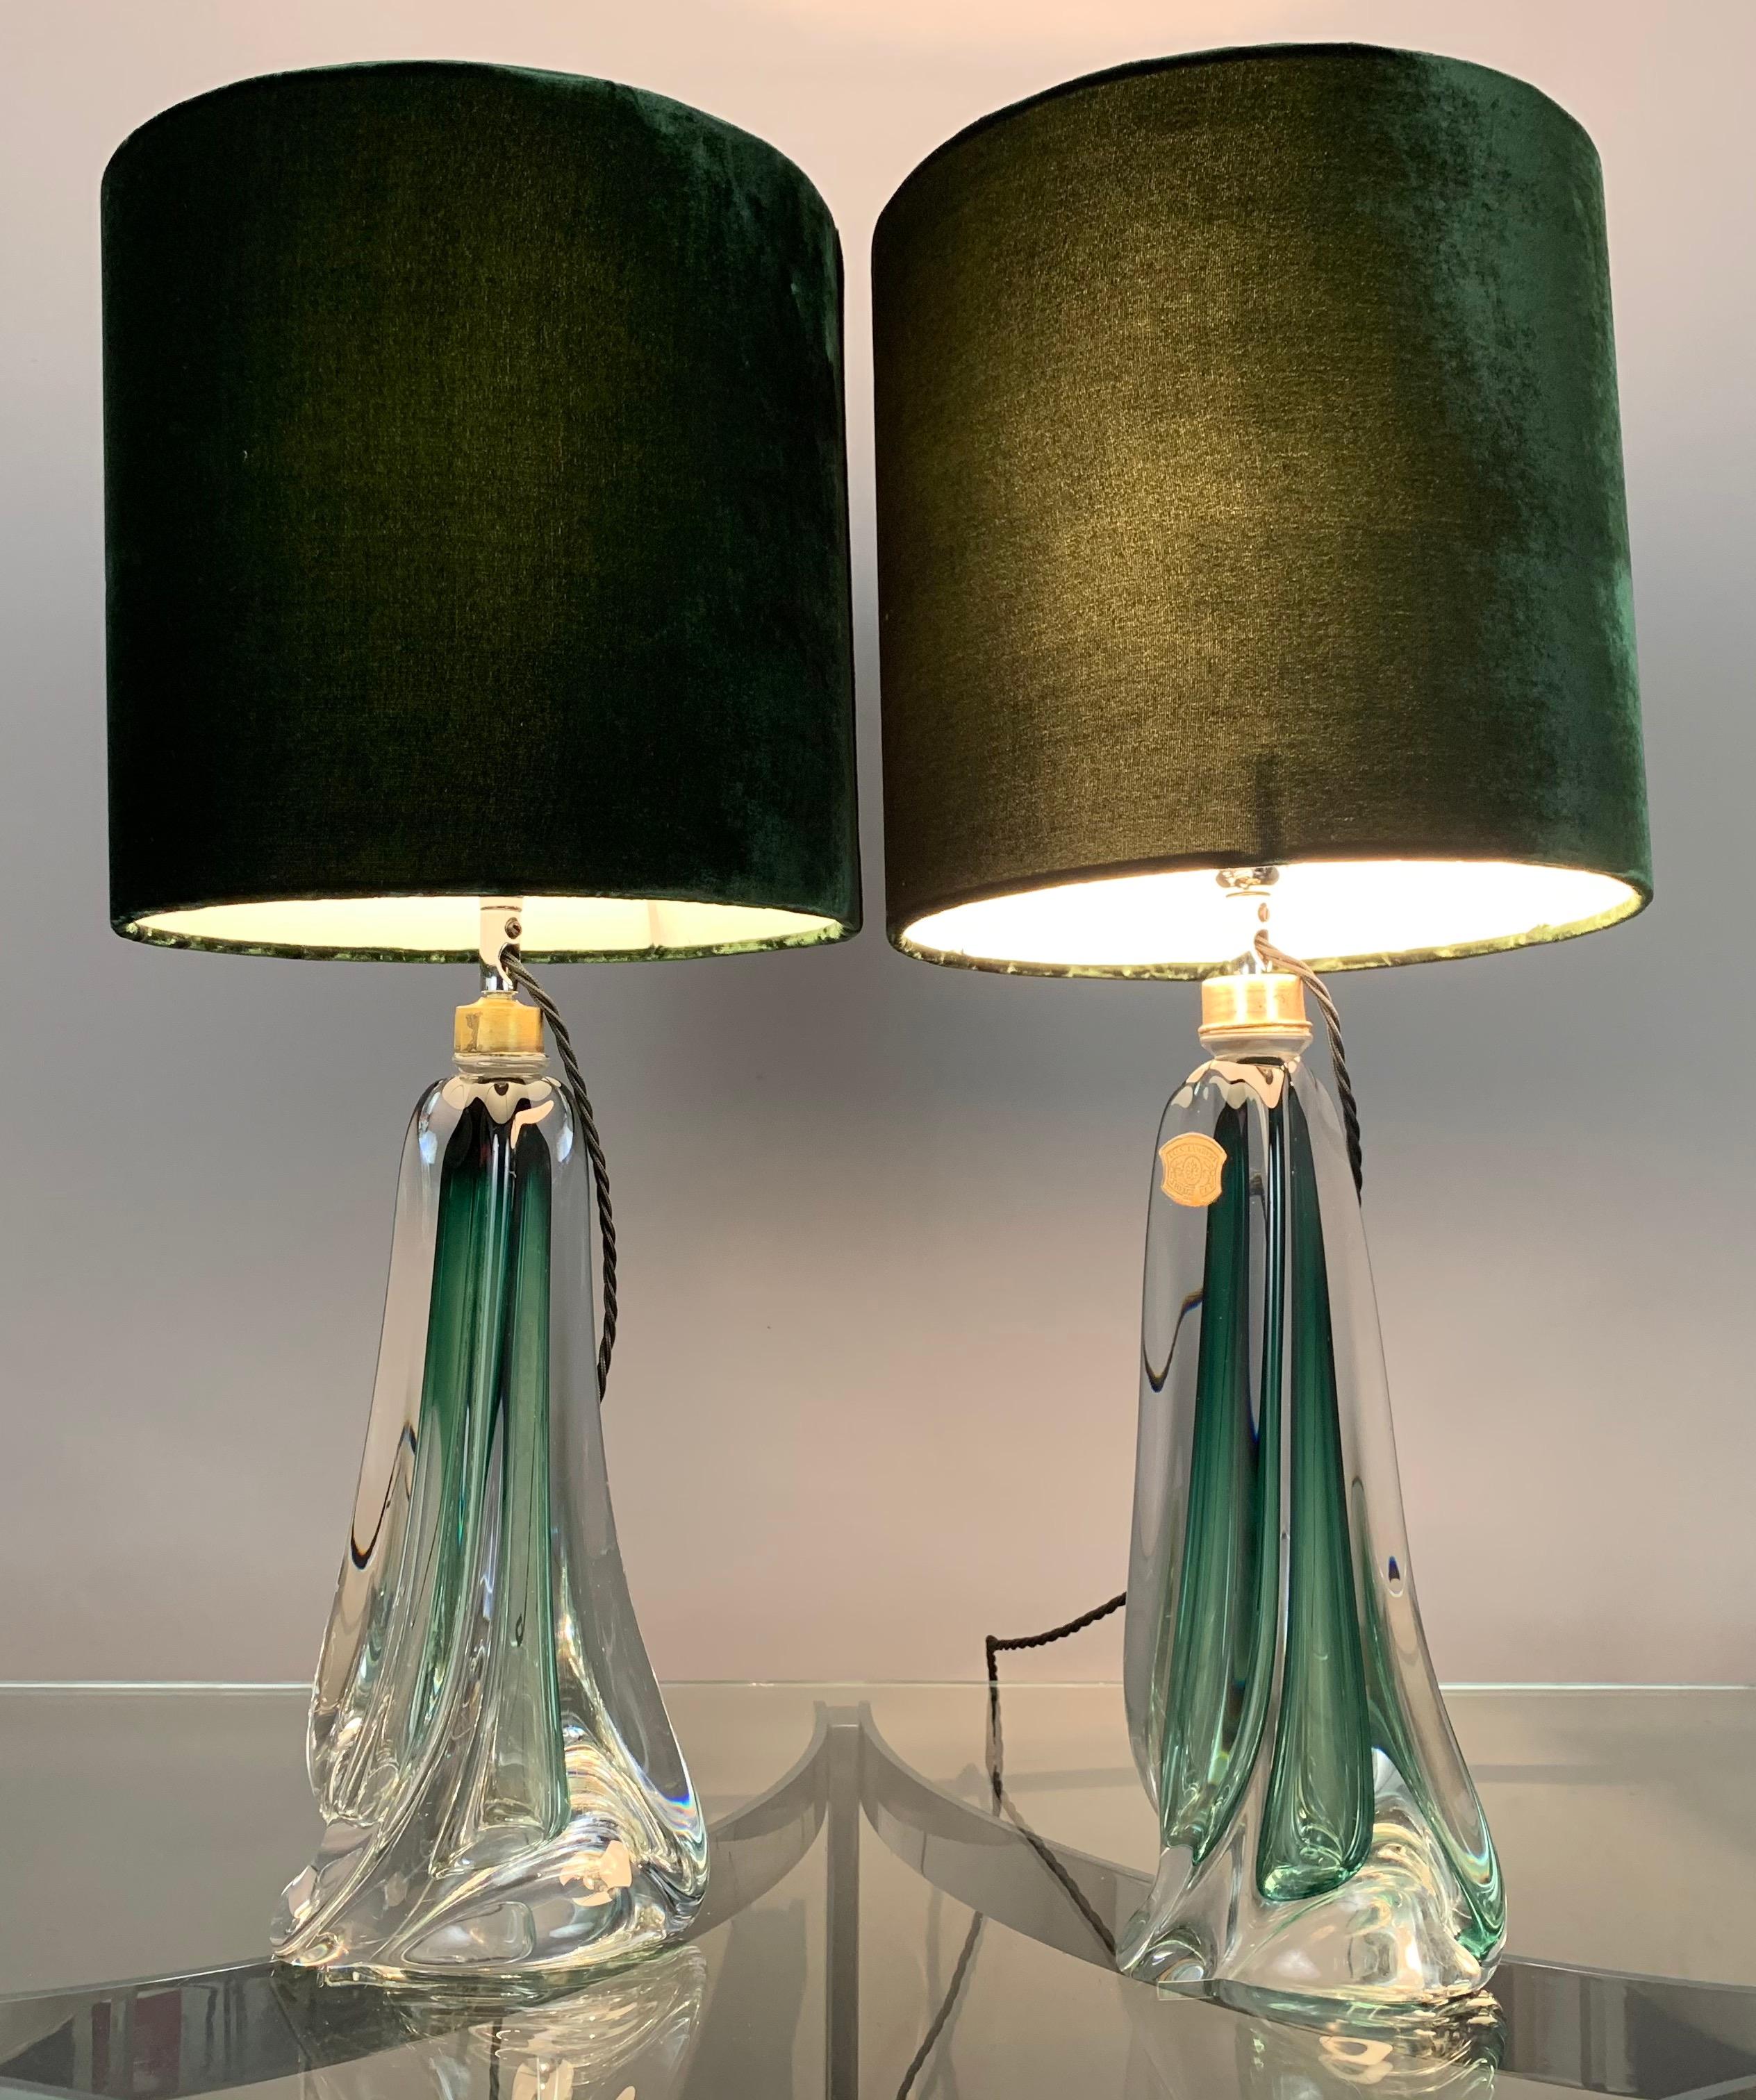 Pair of 1950s Val Saint Lambert dark green and clear glass crystal lamp bases of tapering geometric form with new chrome mounted light fittings. handmade in heavy lead crystal glass in Belgium which makes every one slightly different to the other.